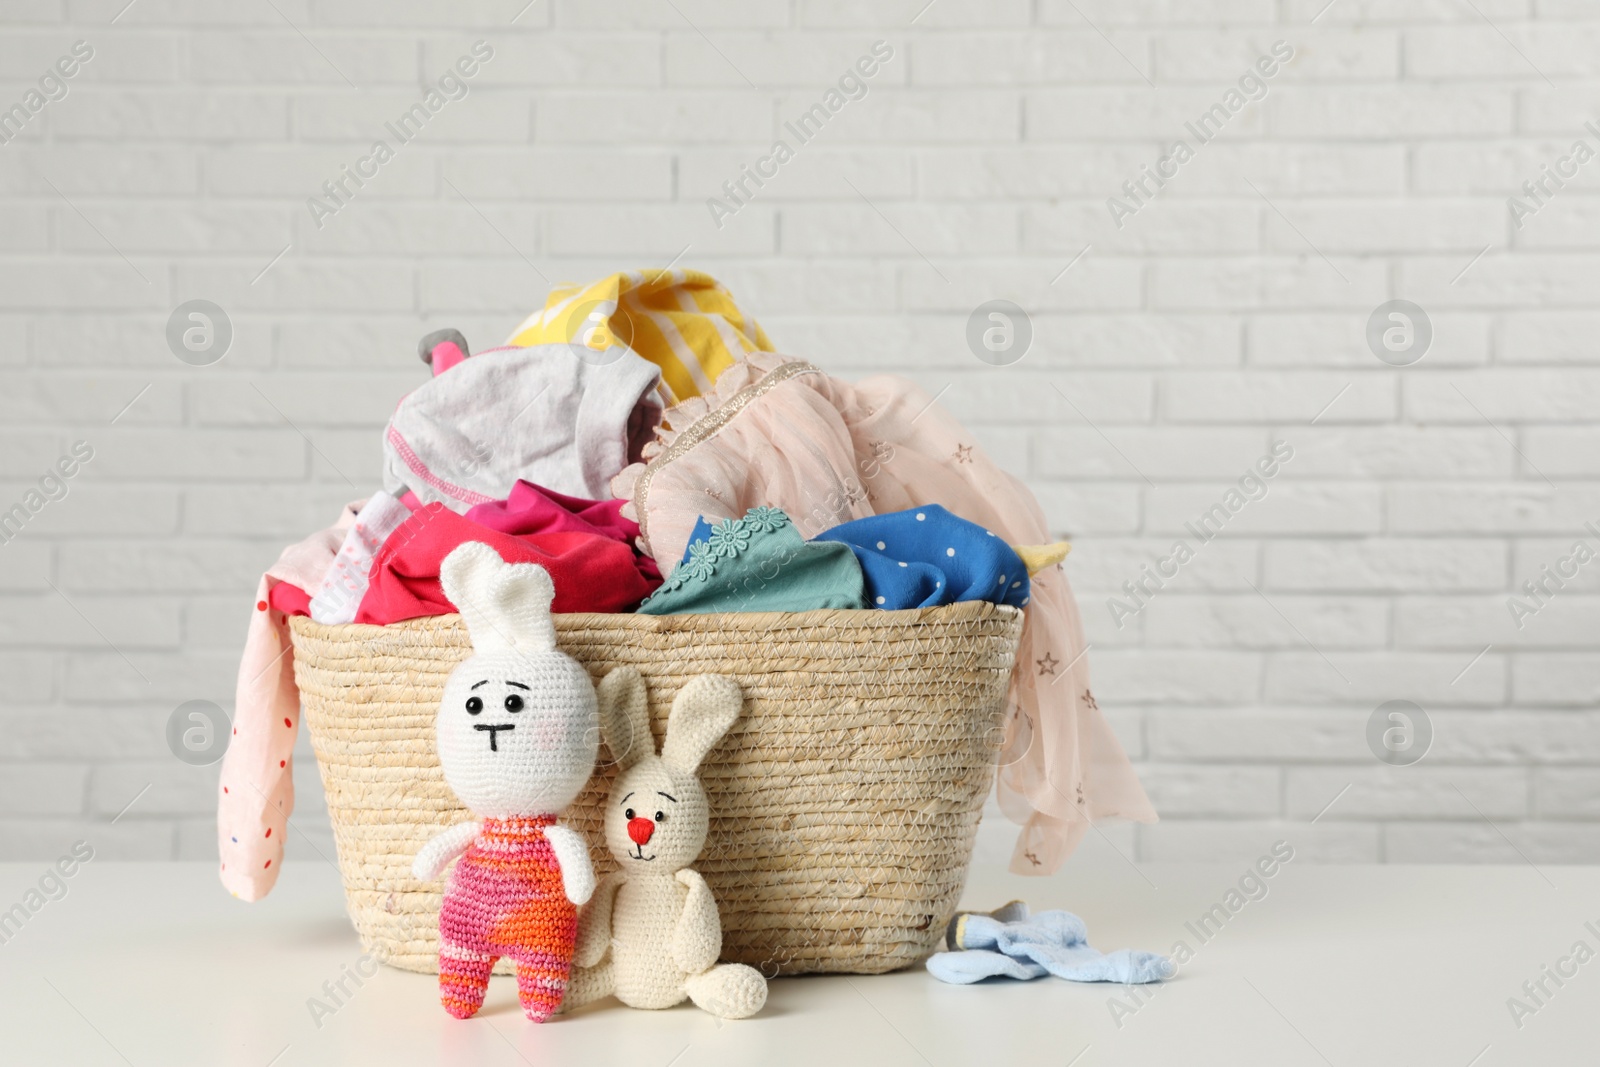 Photo of Wicker basket with laundry and toys on table near white brick wall